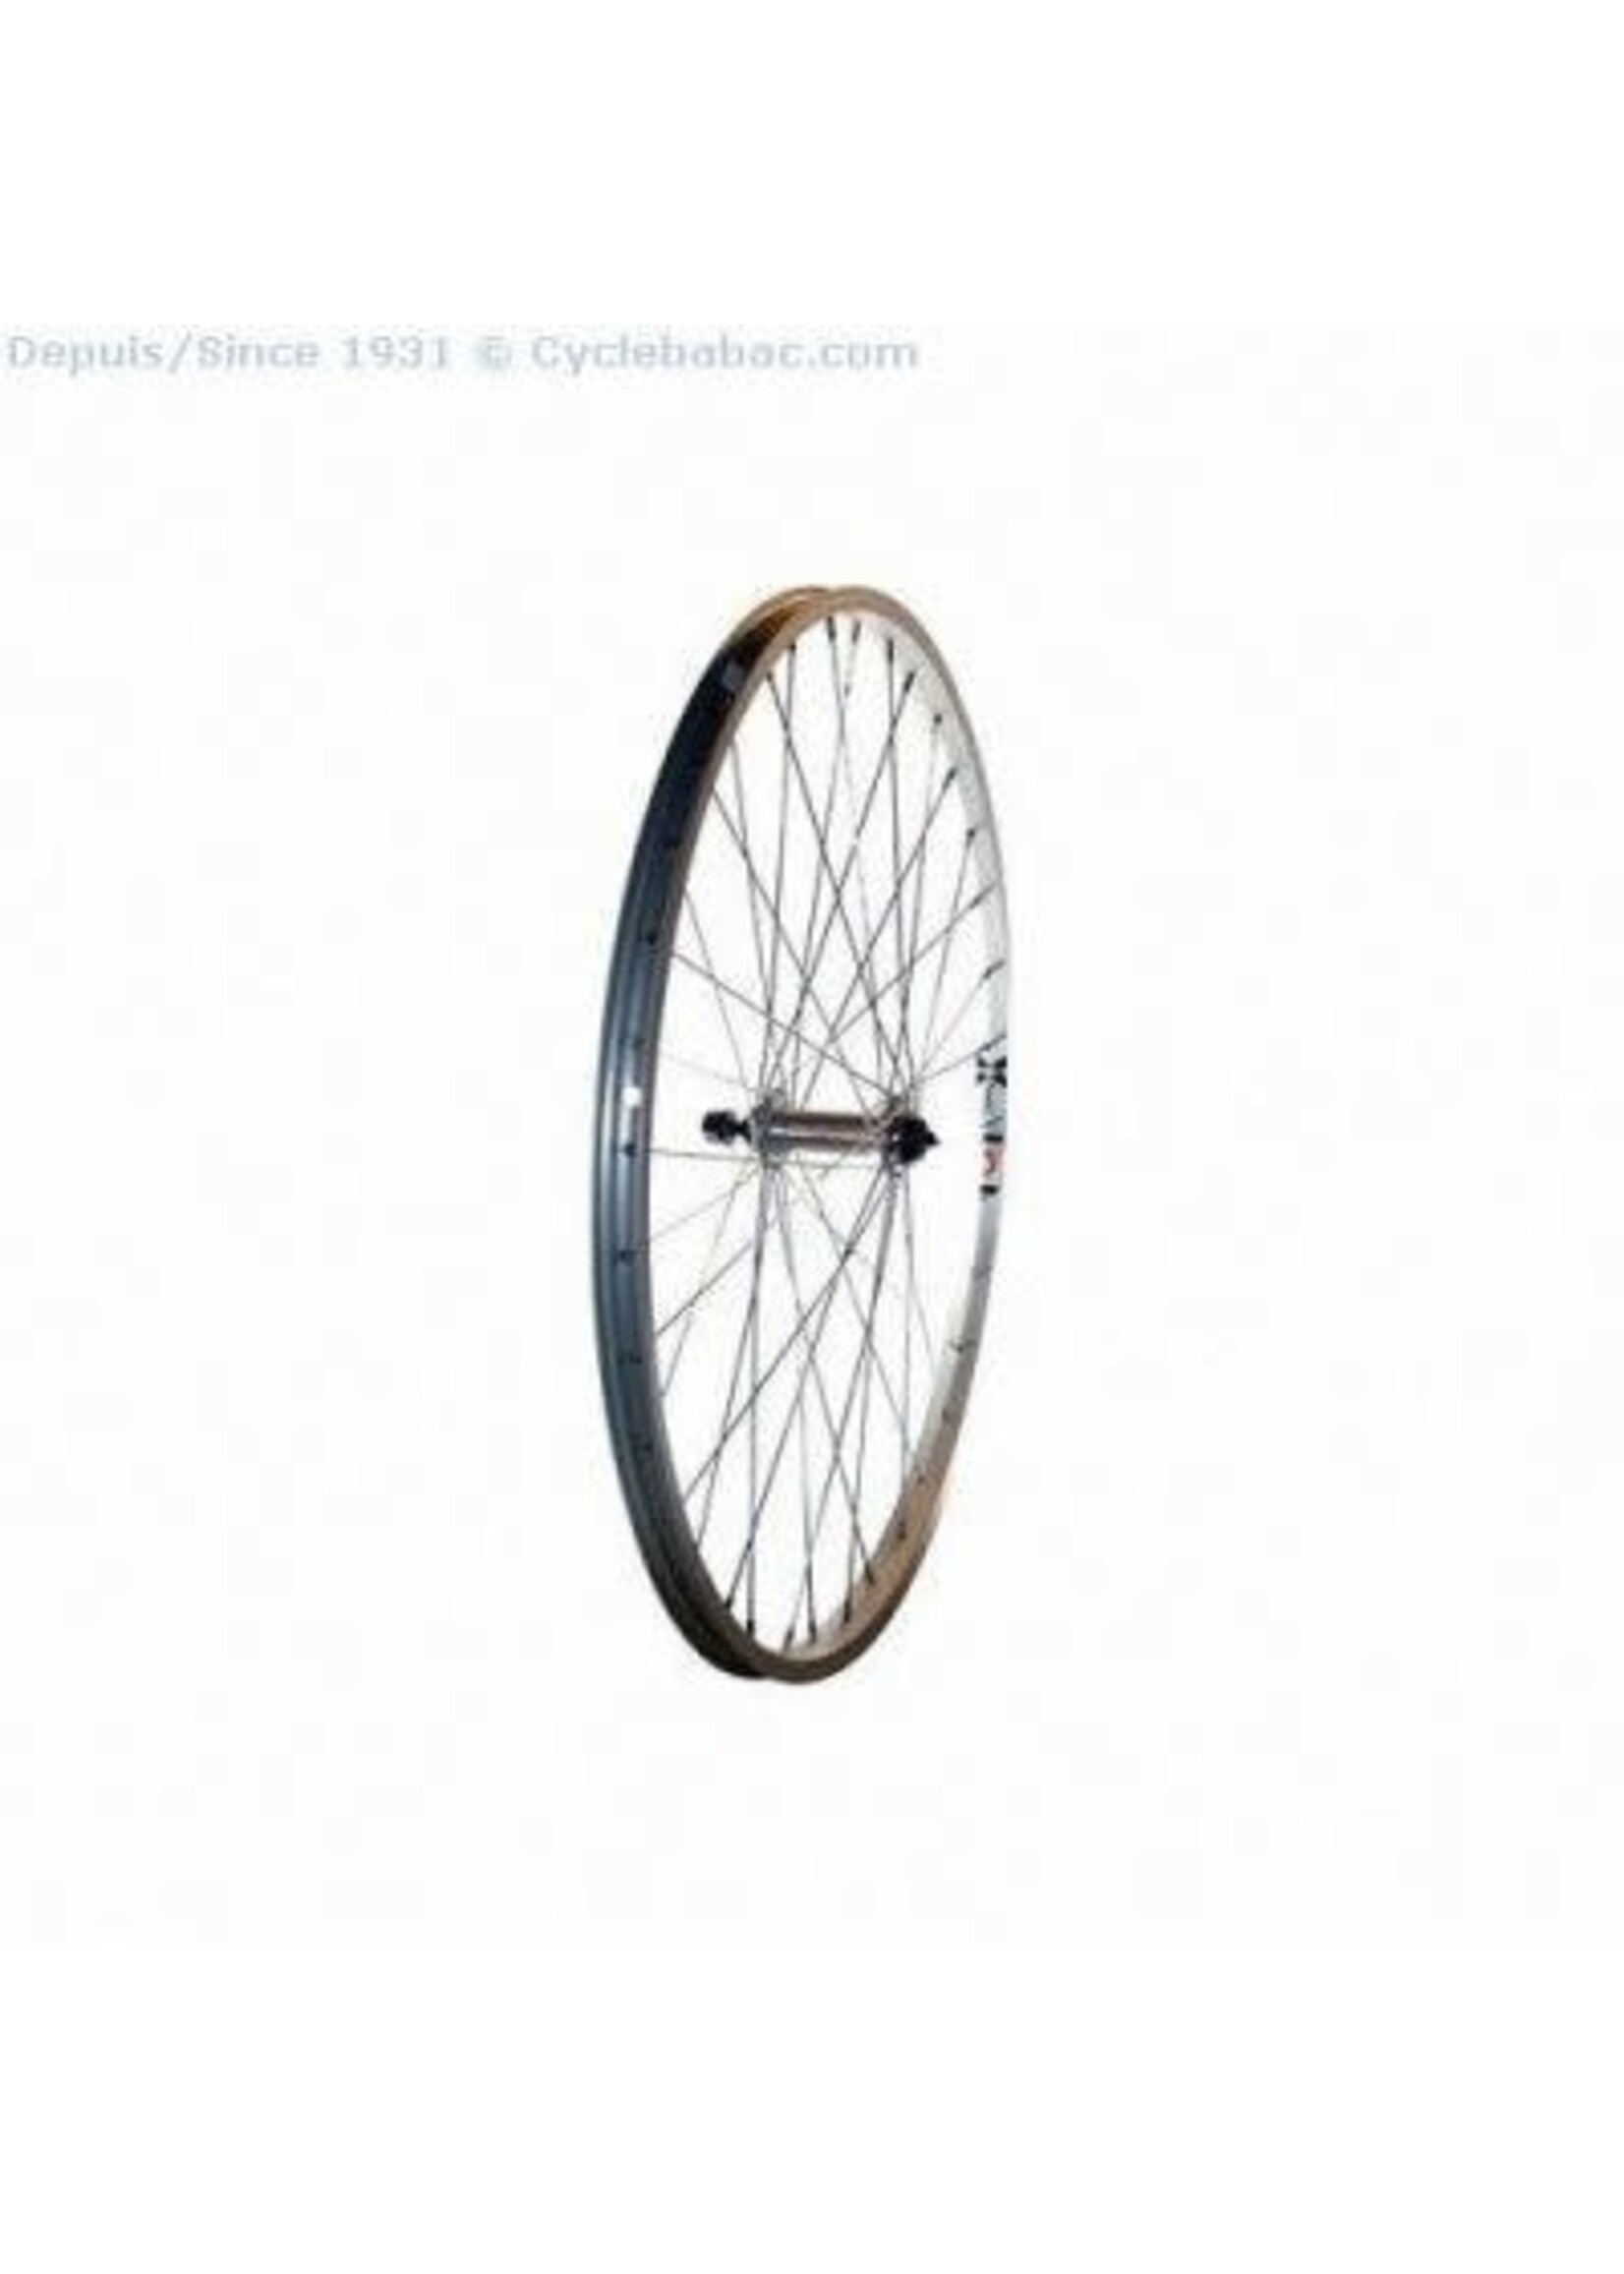 WHEEL - FRONT 24 BABAC 36H NUT SILVER